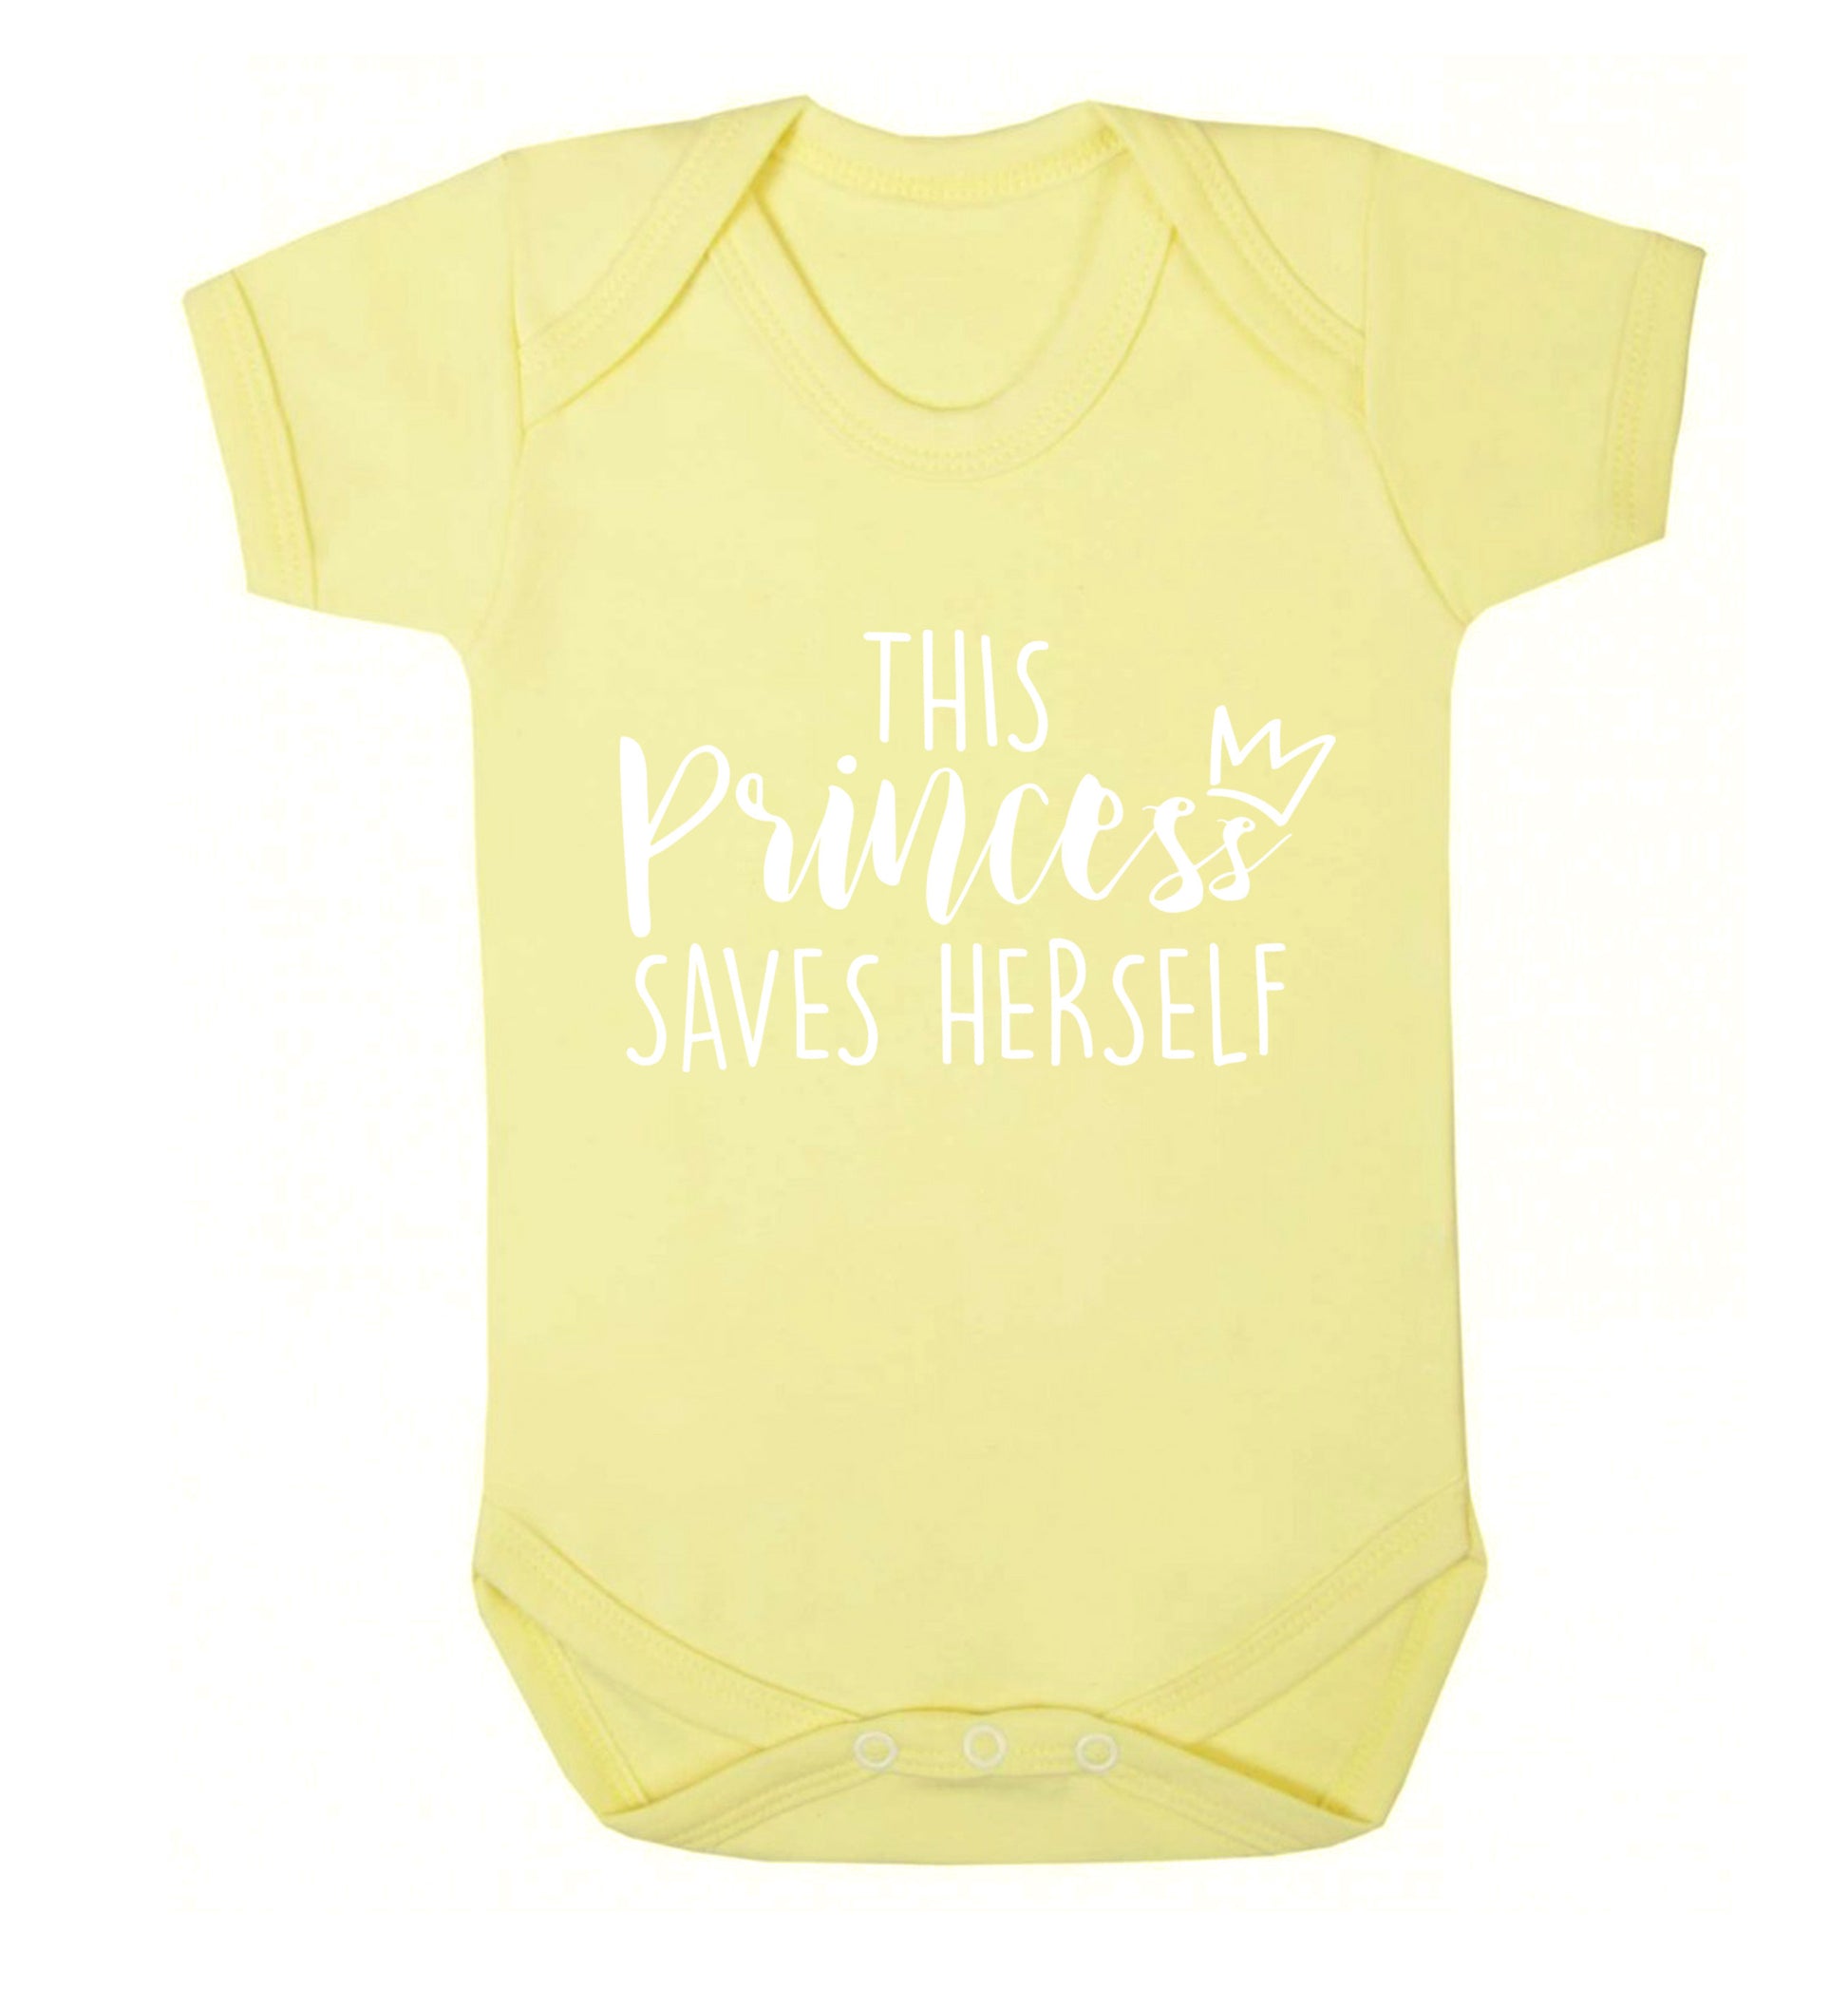 This princess saves herself Baby Vest pale yellow 18-24 months